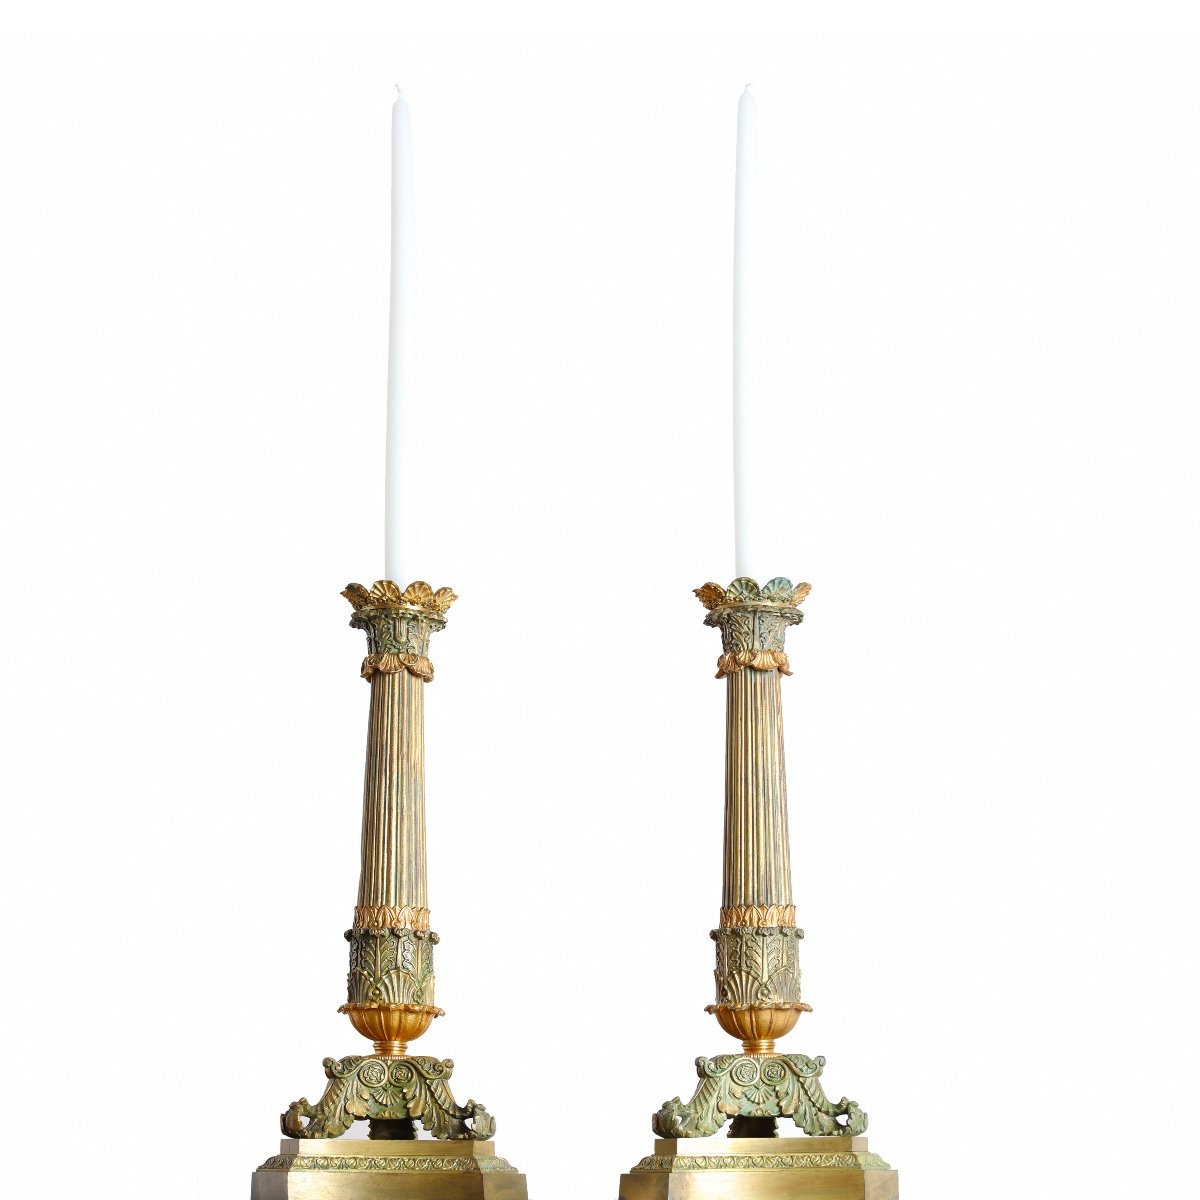 Large Pair Of Tripod Candlesticks In Bronze, Restoration Period 48 Cm - Early 19th Century-photo-8